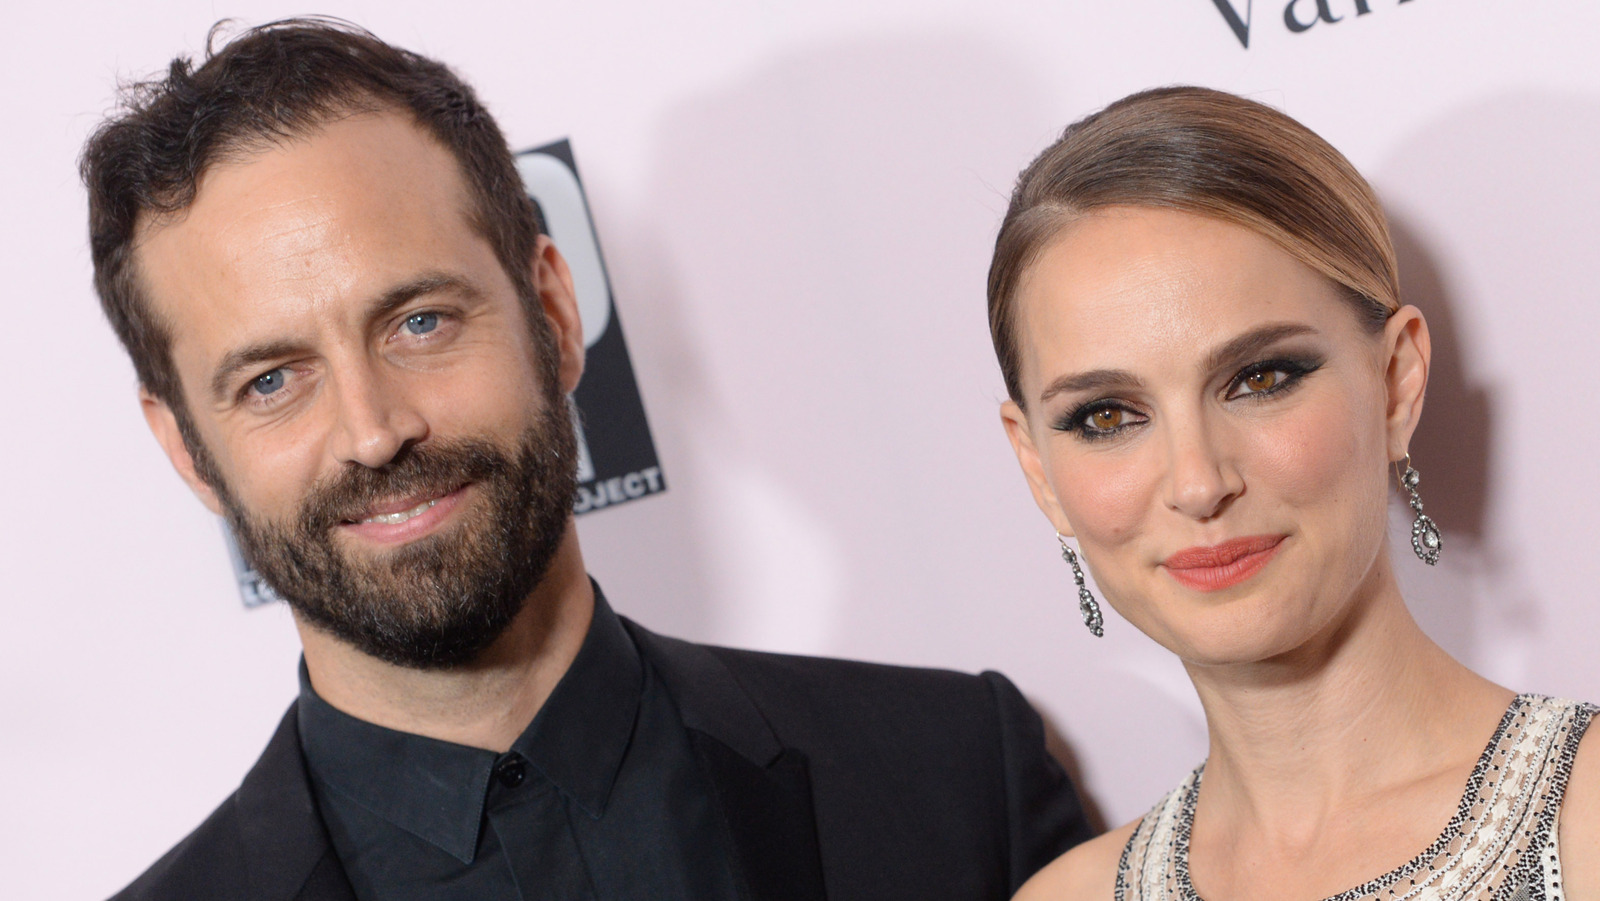 The Rumored Affair That Rocked Natalie Portman And Benjamin Millepied's ...